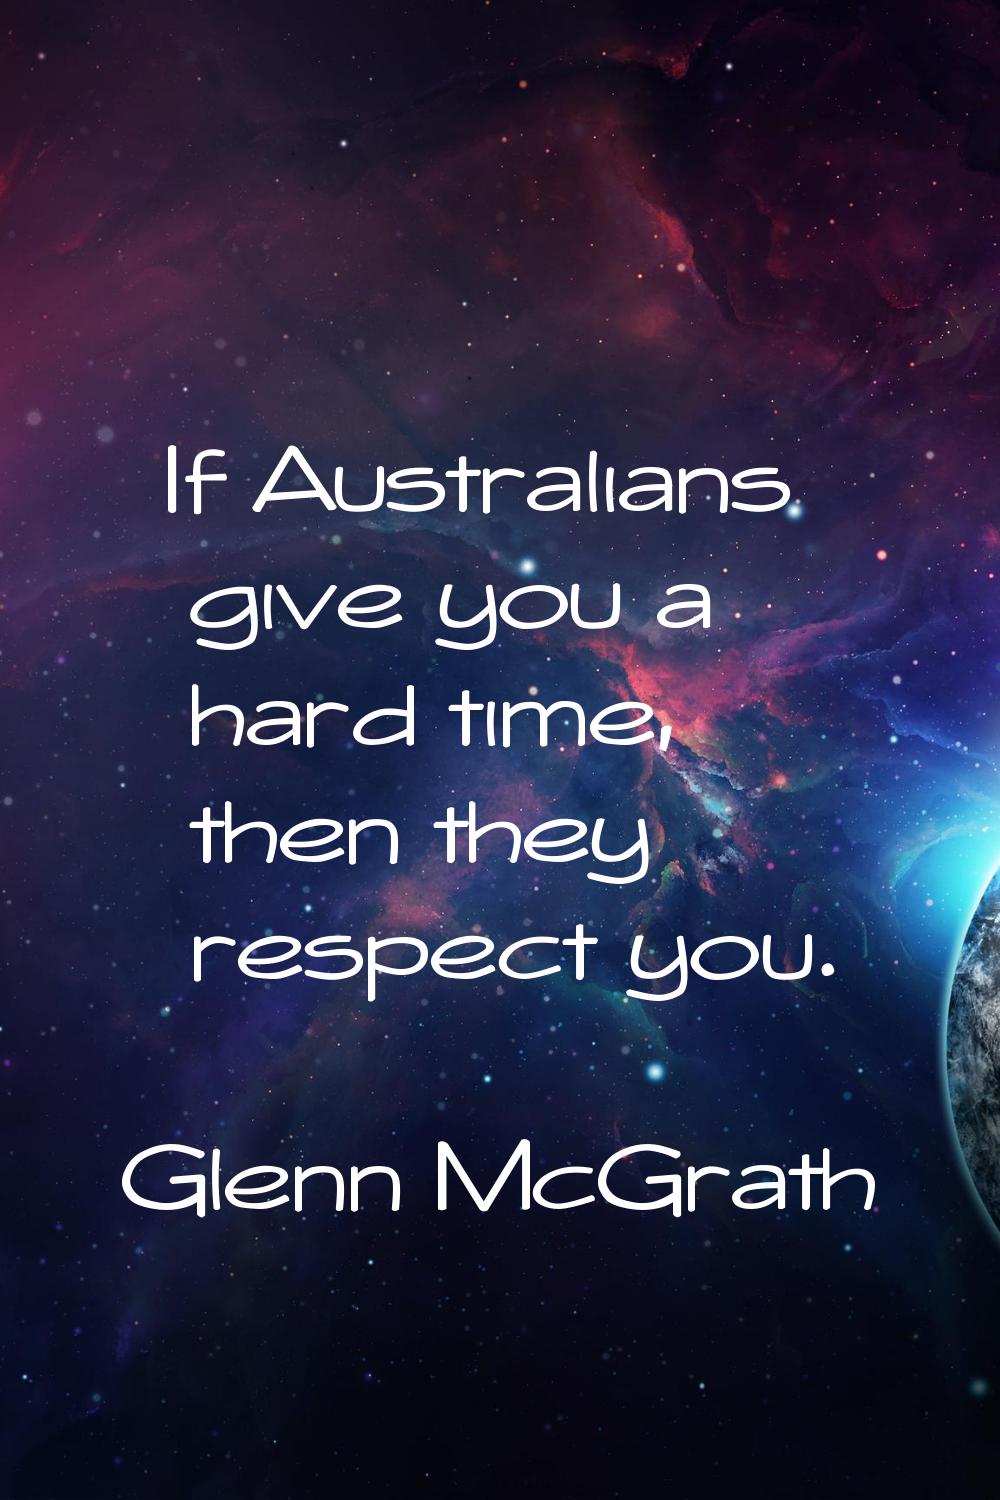 If Australians give you a hard time, then they respect you.